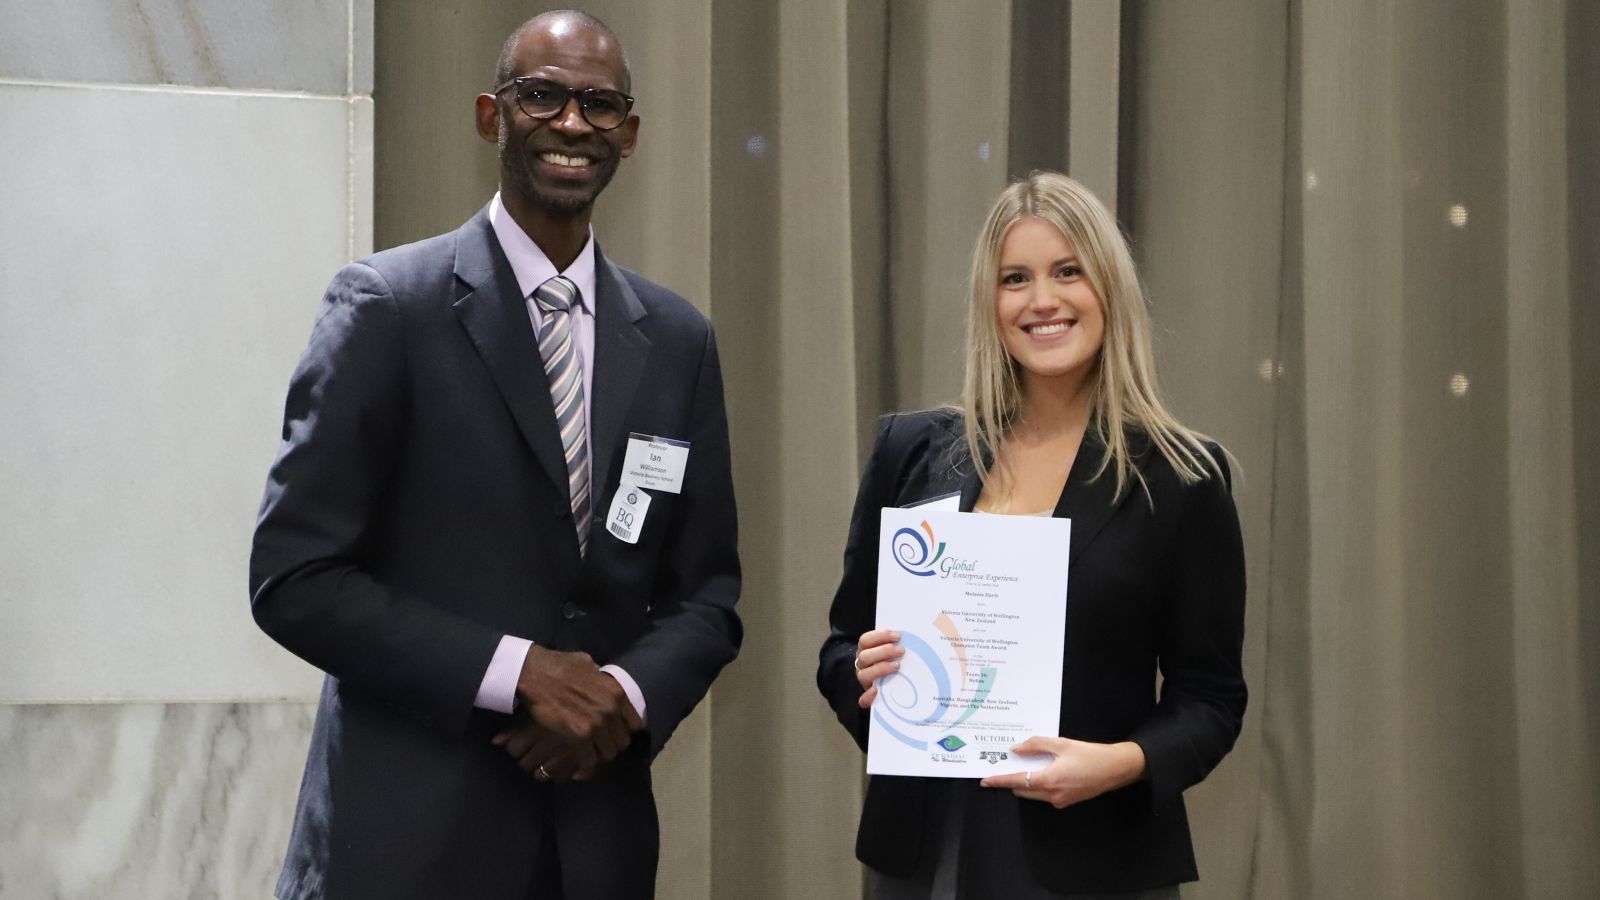 Pro-Vice-Chancellor and Dean of Commerce Professor Ian O Williamson with Bachelor of Commerce student Melanie Davis, who is holding her Champion Team Leader Award